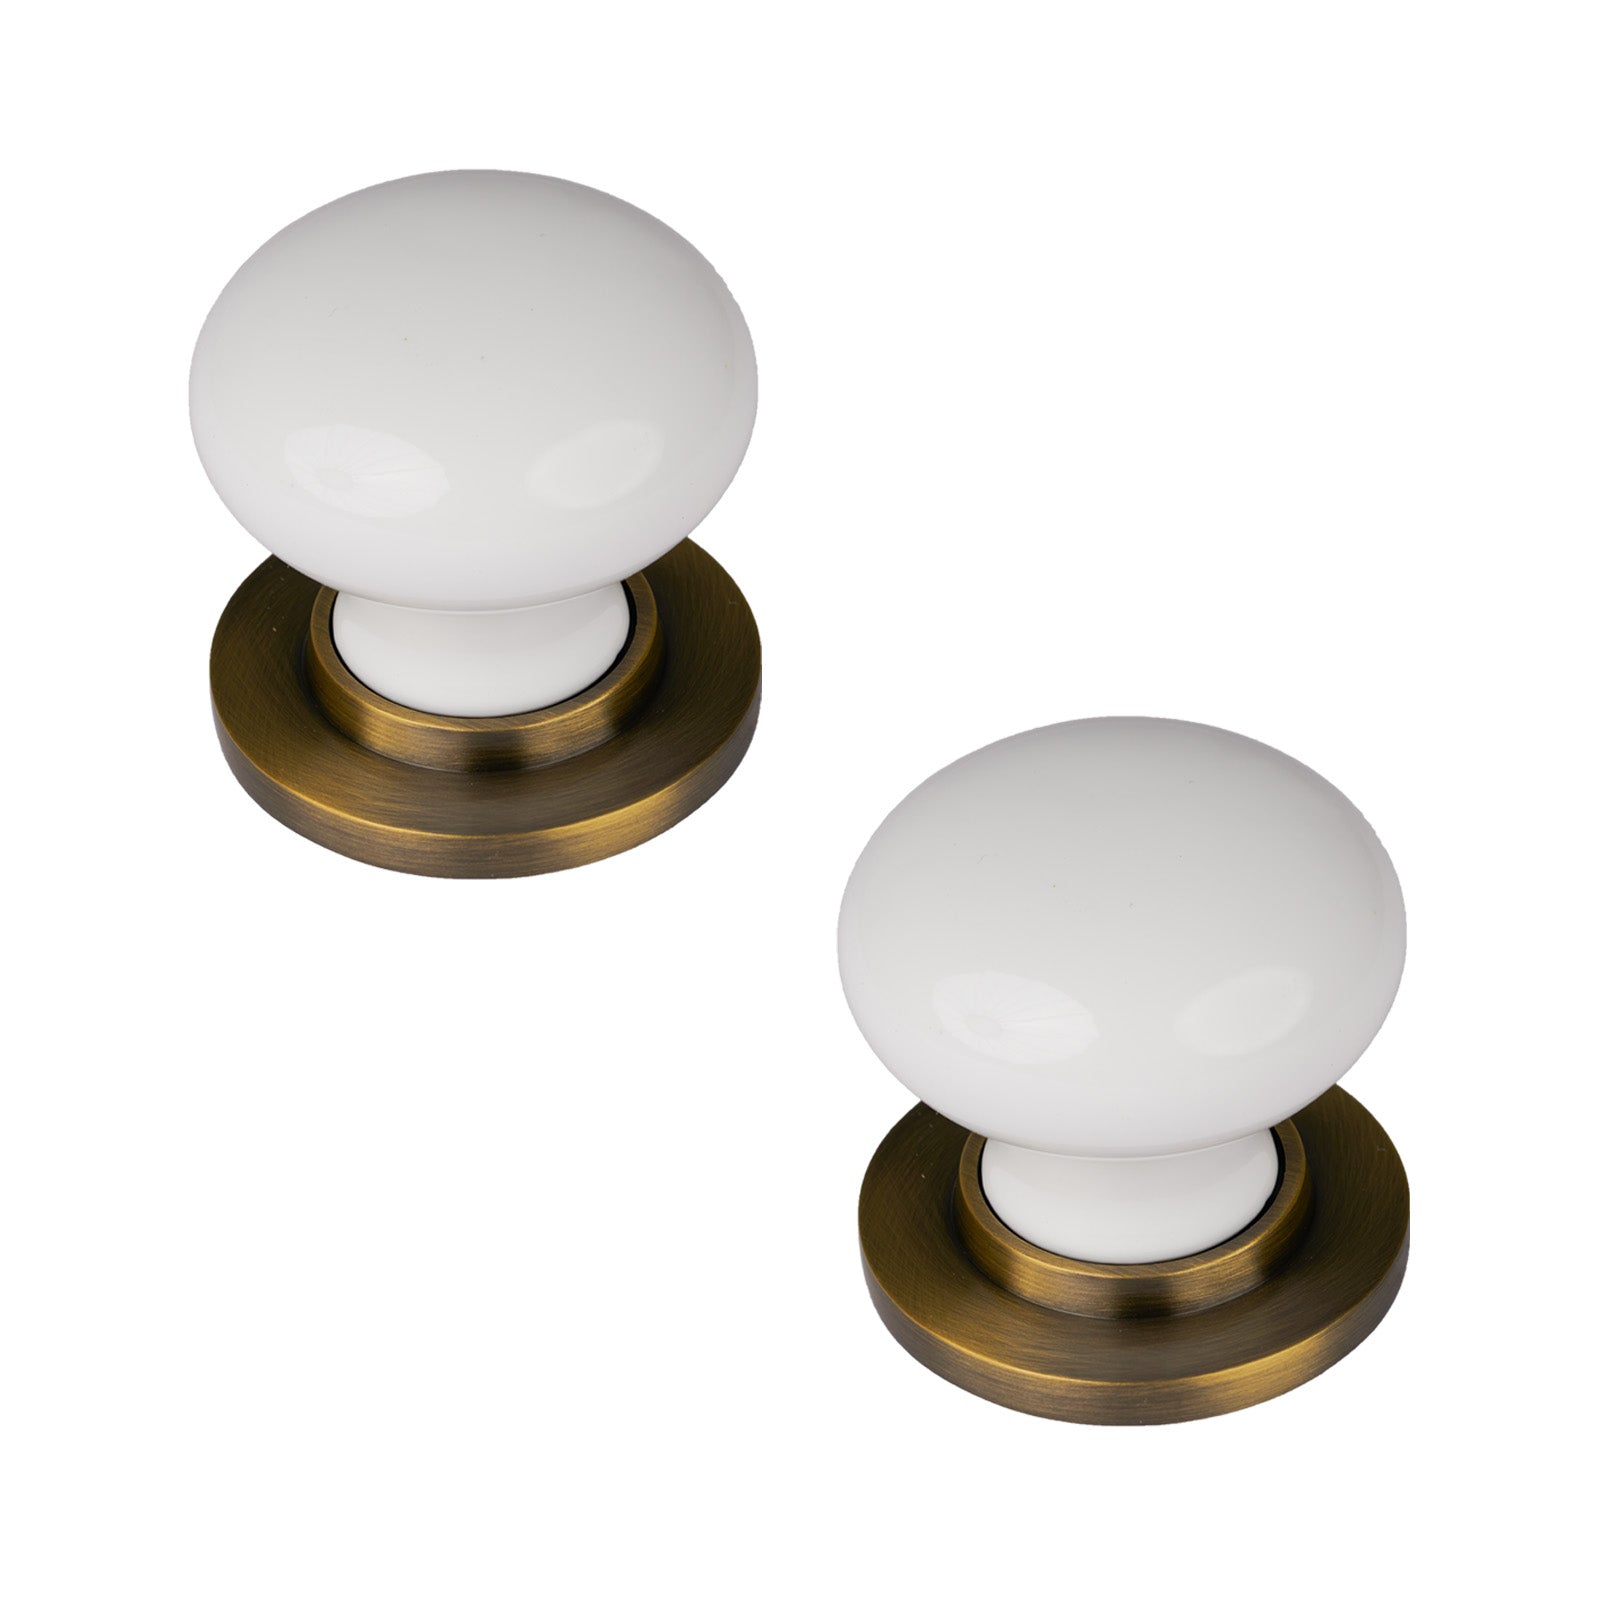 SHOW Plain White Porcelain Door Knob with Aged Brass Rose